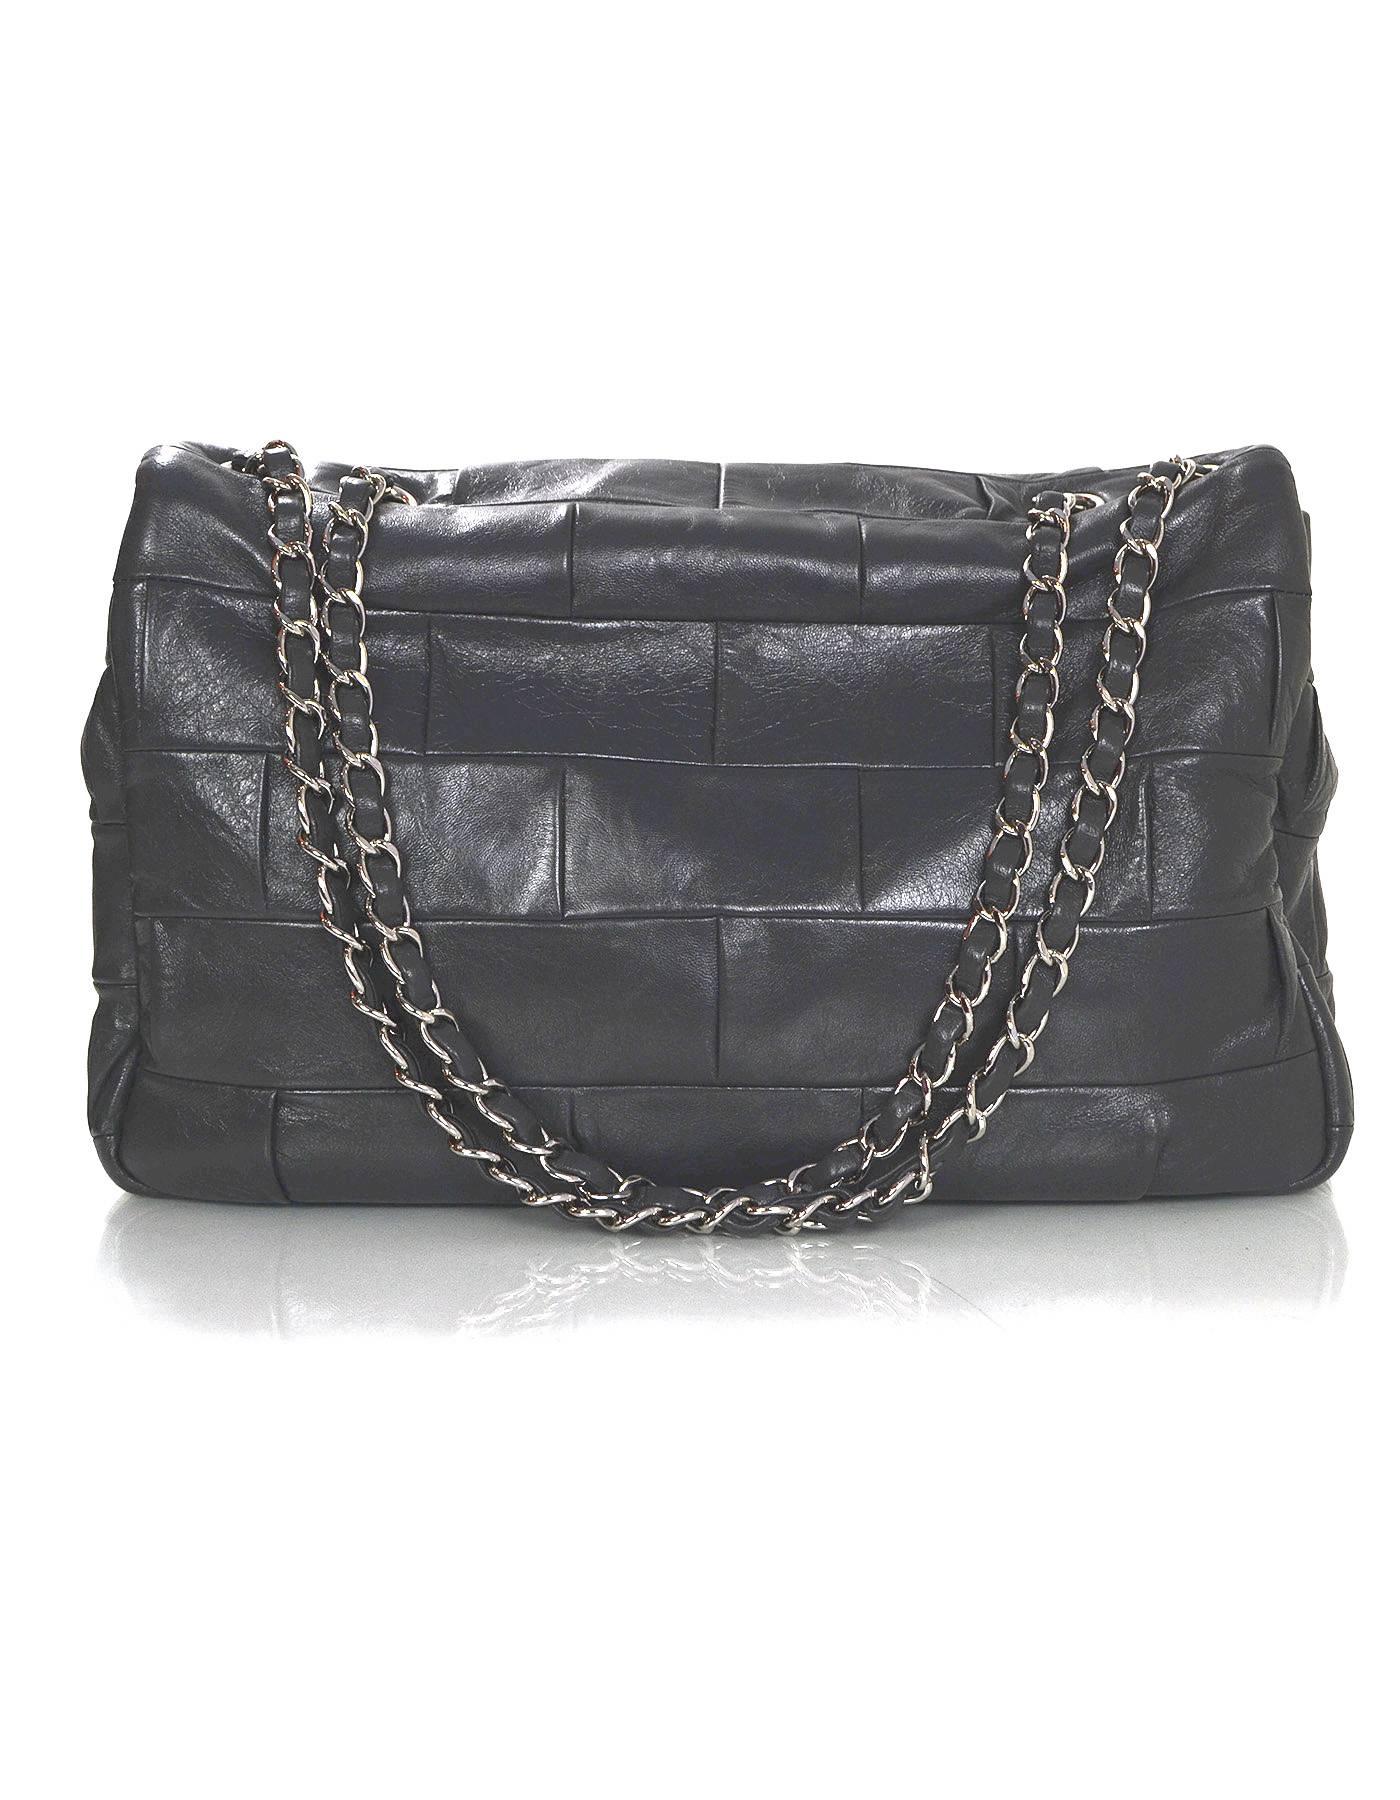 Gray Chanel Grey Leather Square Quilted Reissue 2.55 Flap Bag